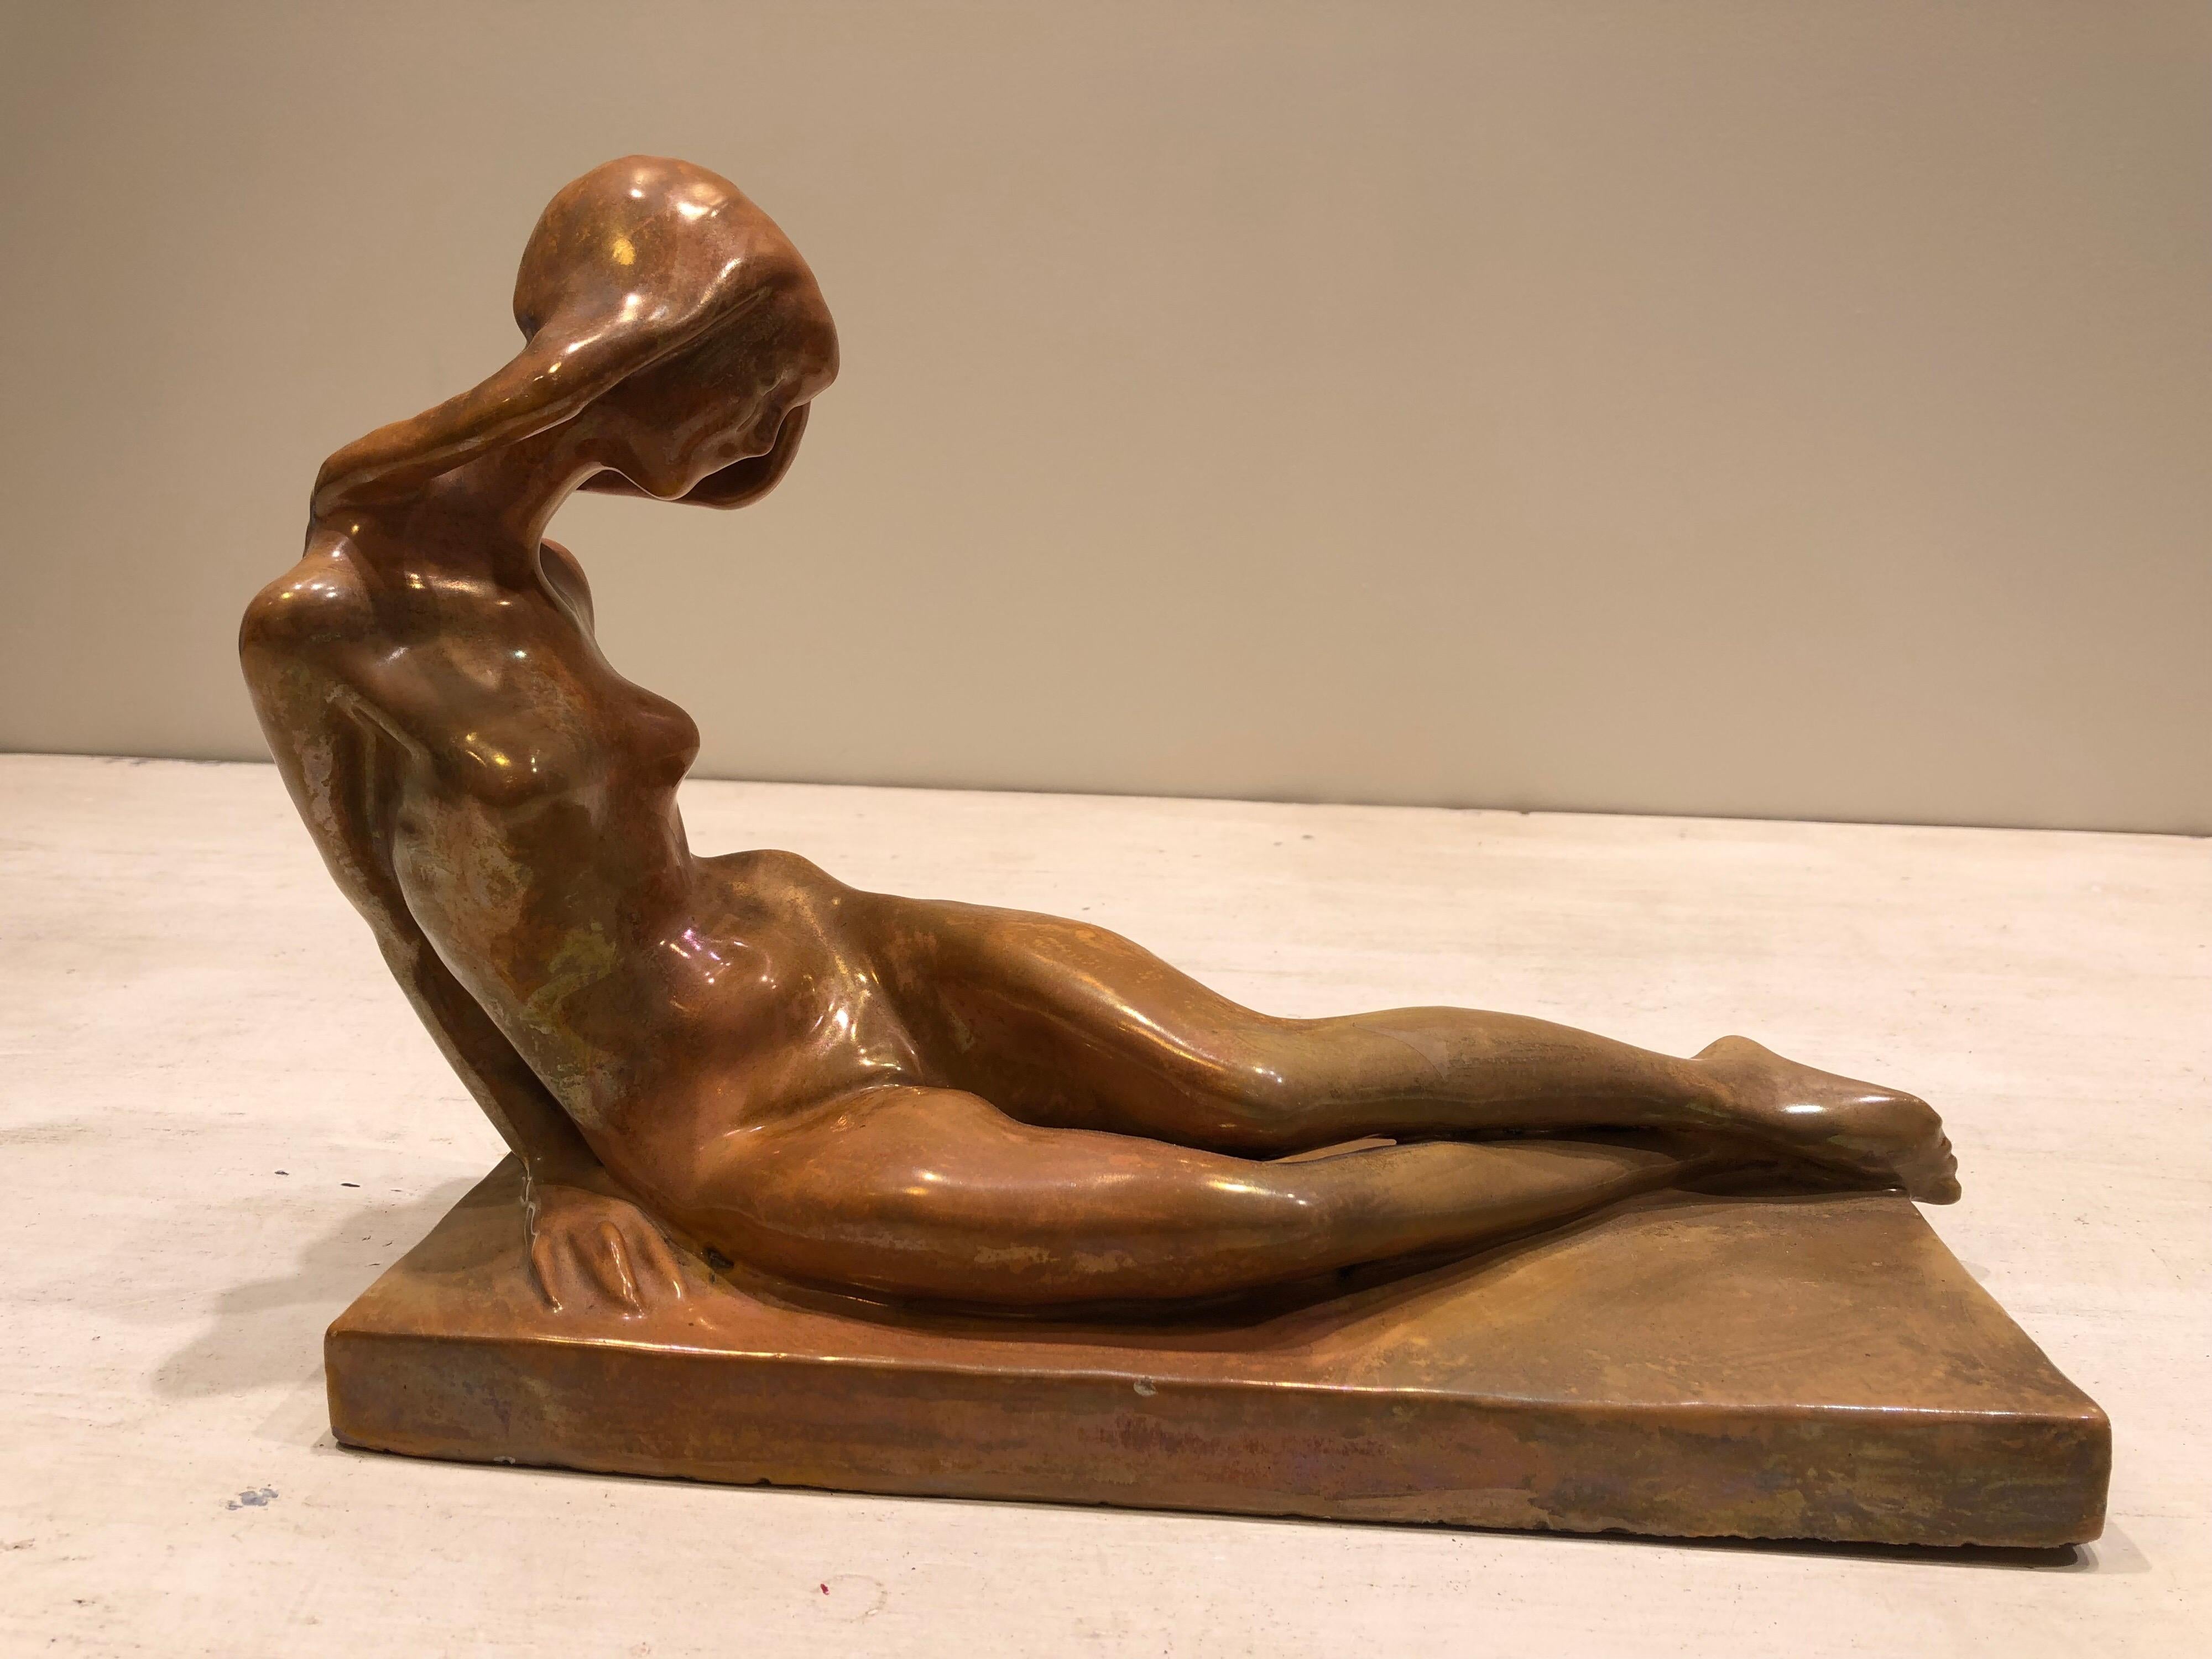 Hand-Crafted 1920s Italian Mazzolani Signed Ceramic Sculpture of a Nude Woman For Sale